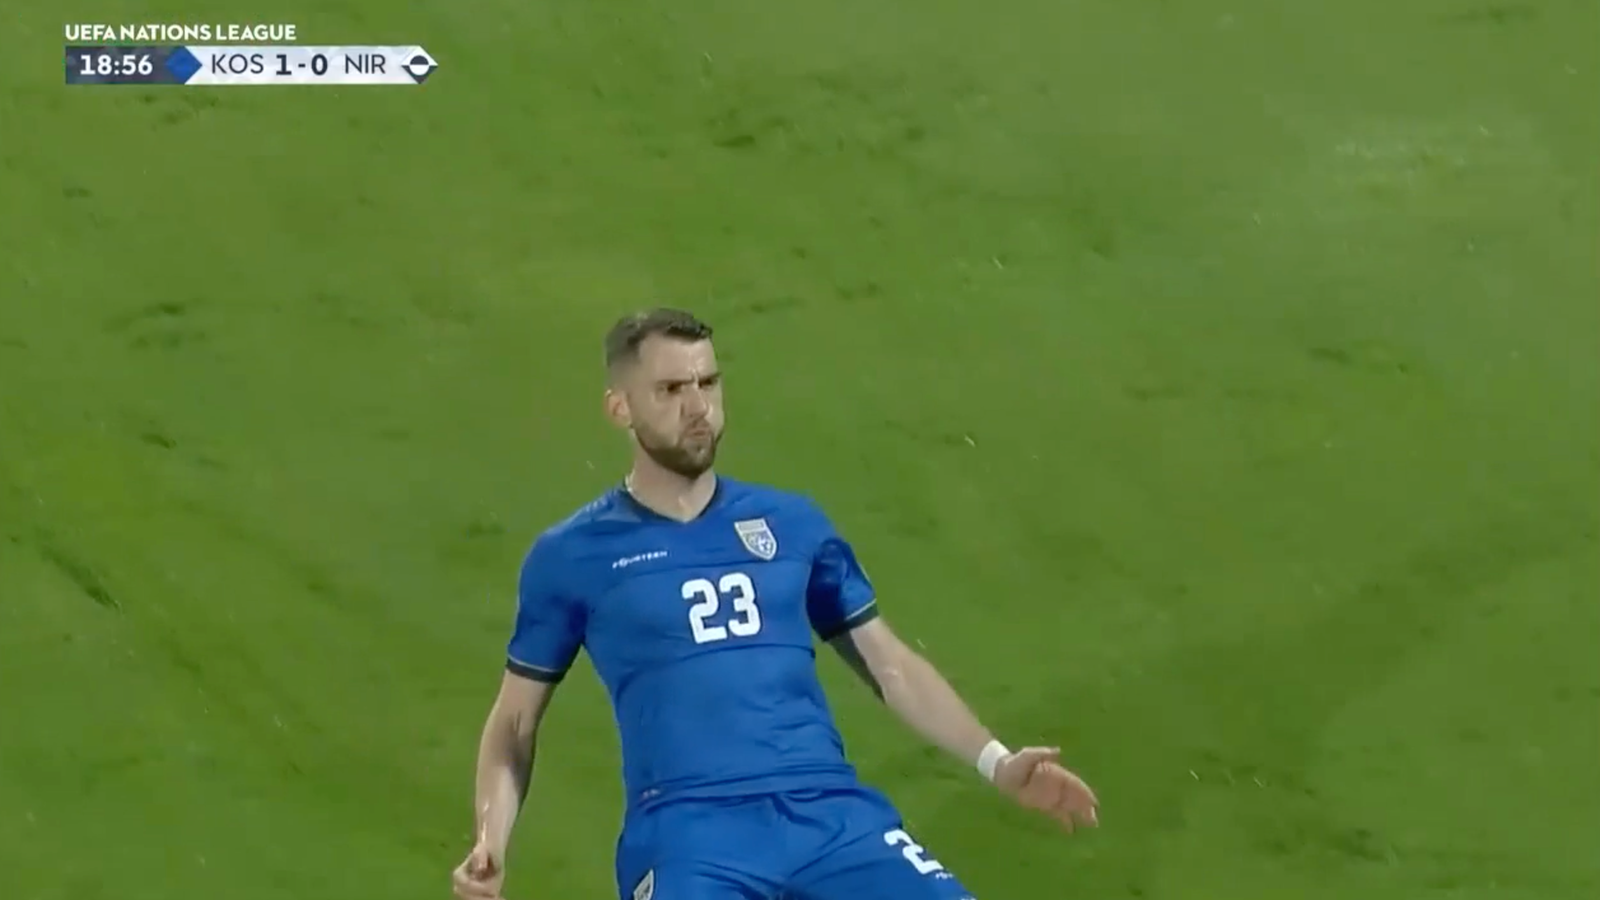 Zymer Bytyqi gives Kosovo an early 2-0 lead over Northern Ireland